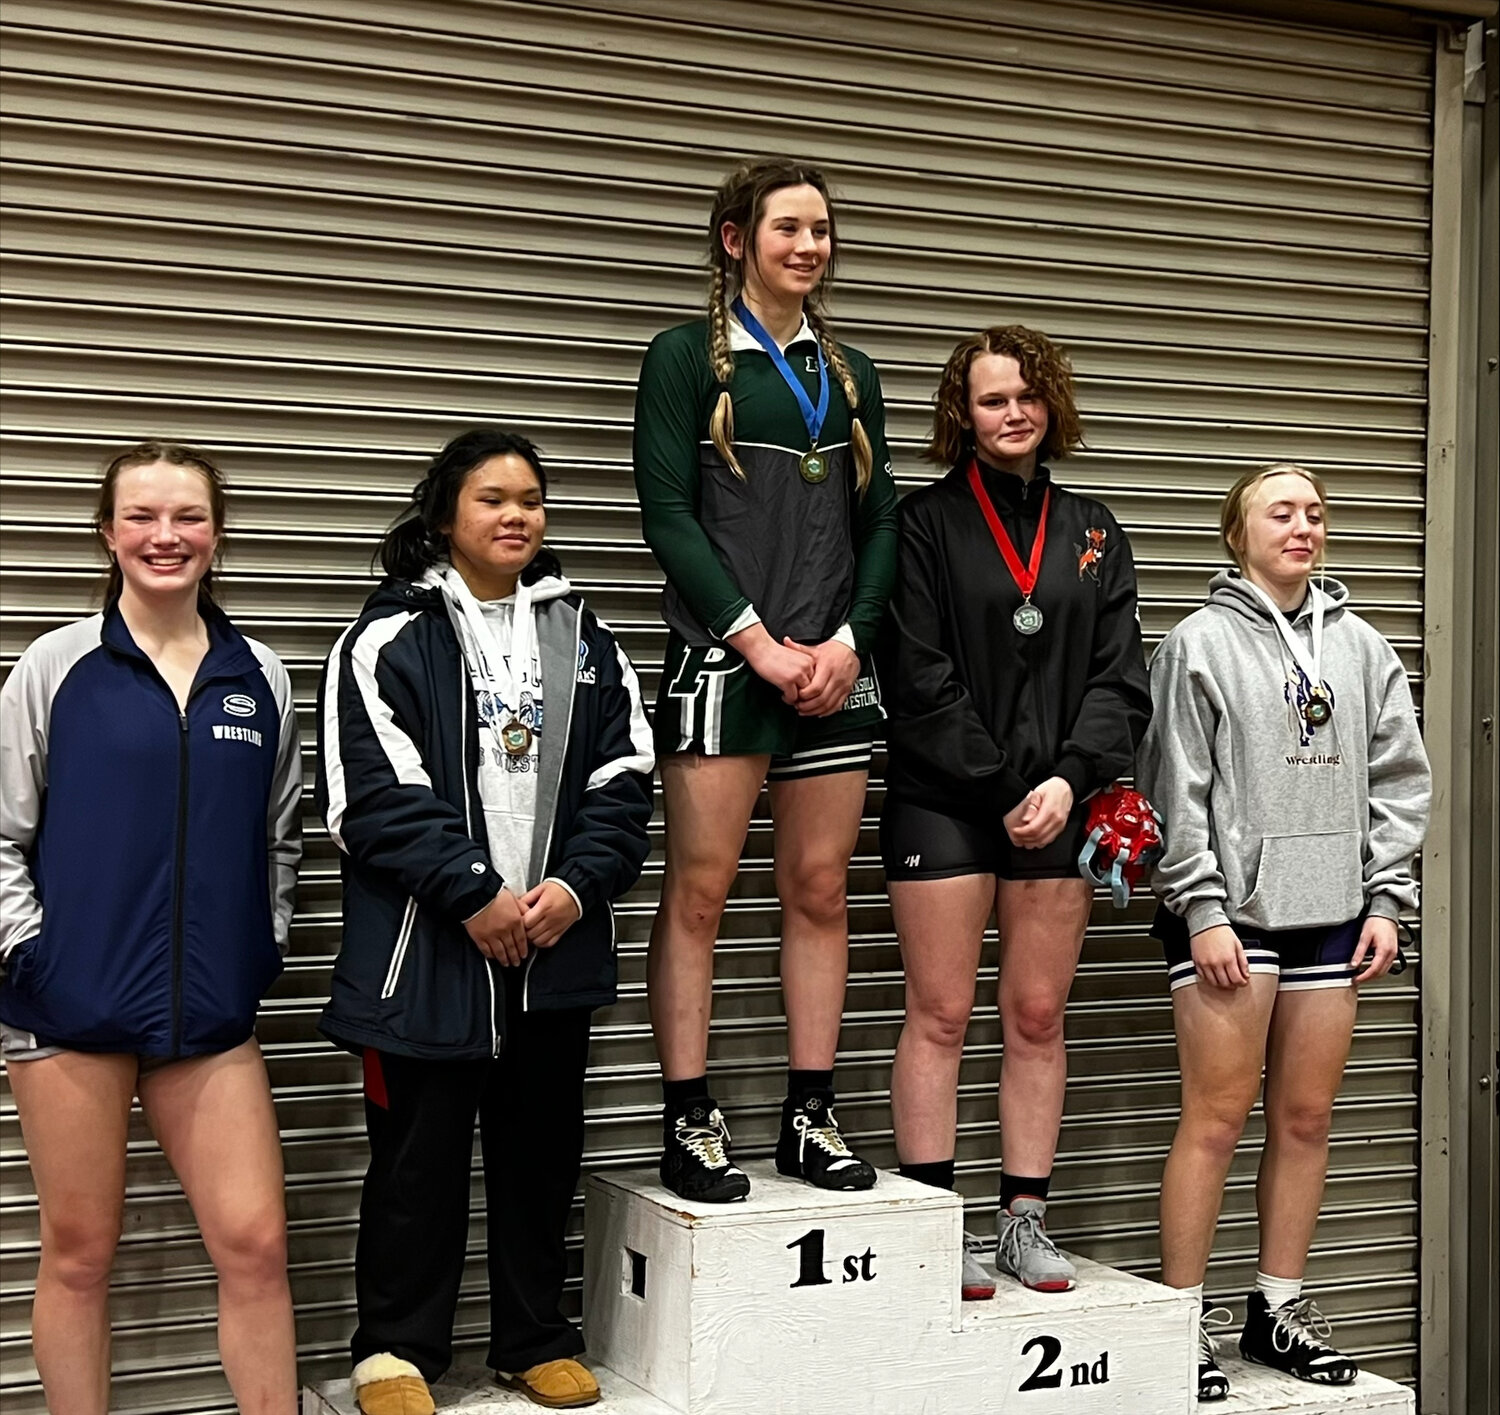 Bailey Parker continues to dominate on the mat, competing to best her fourth place finish last year.